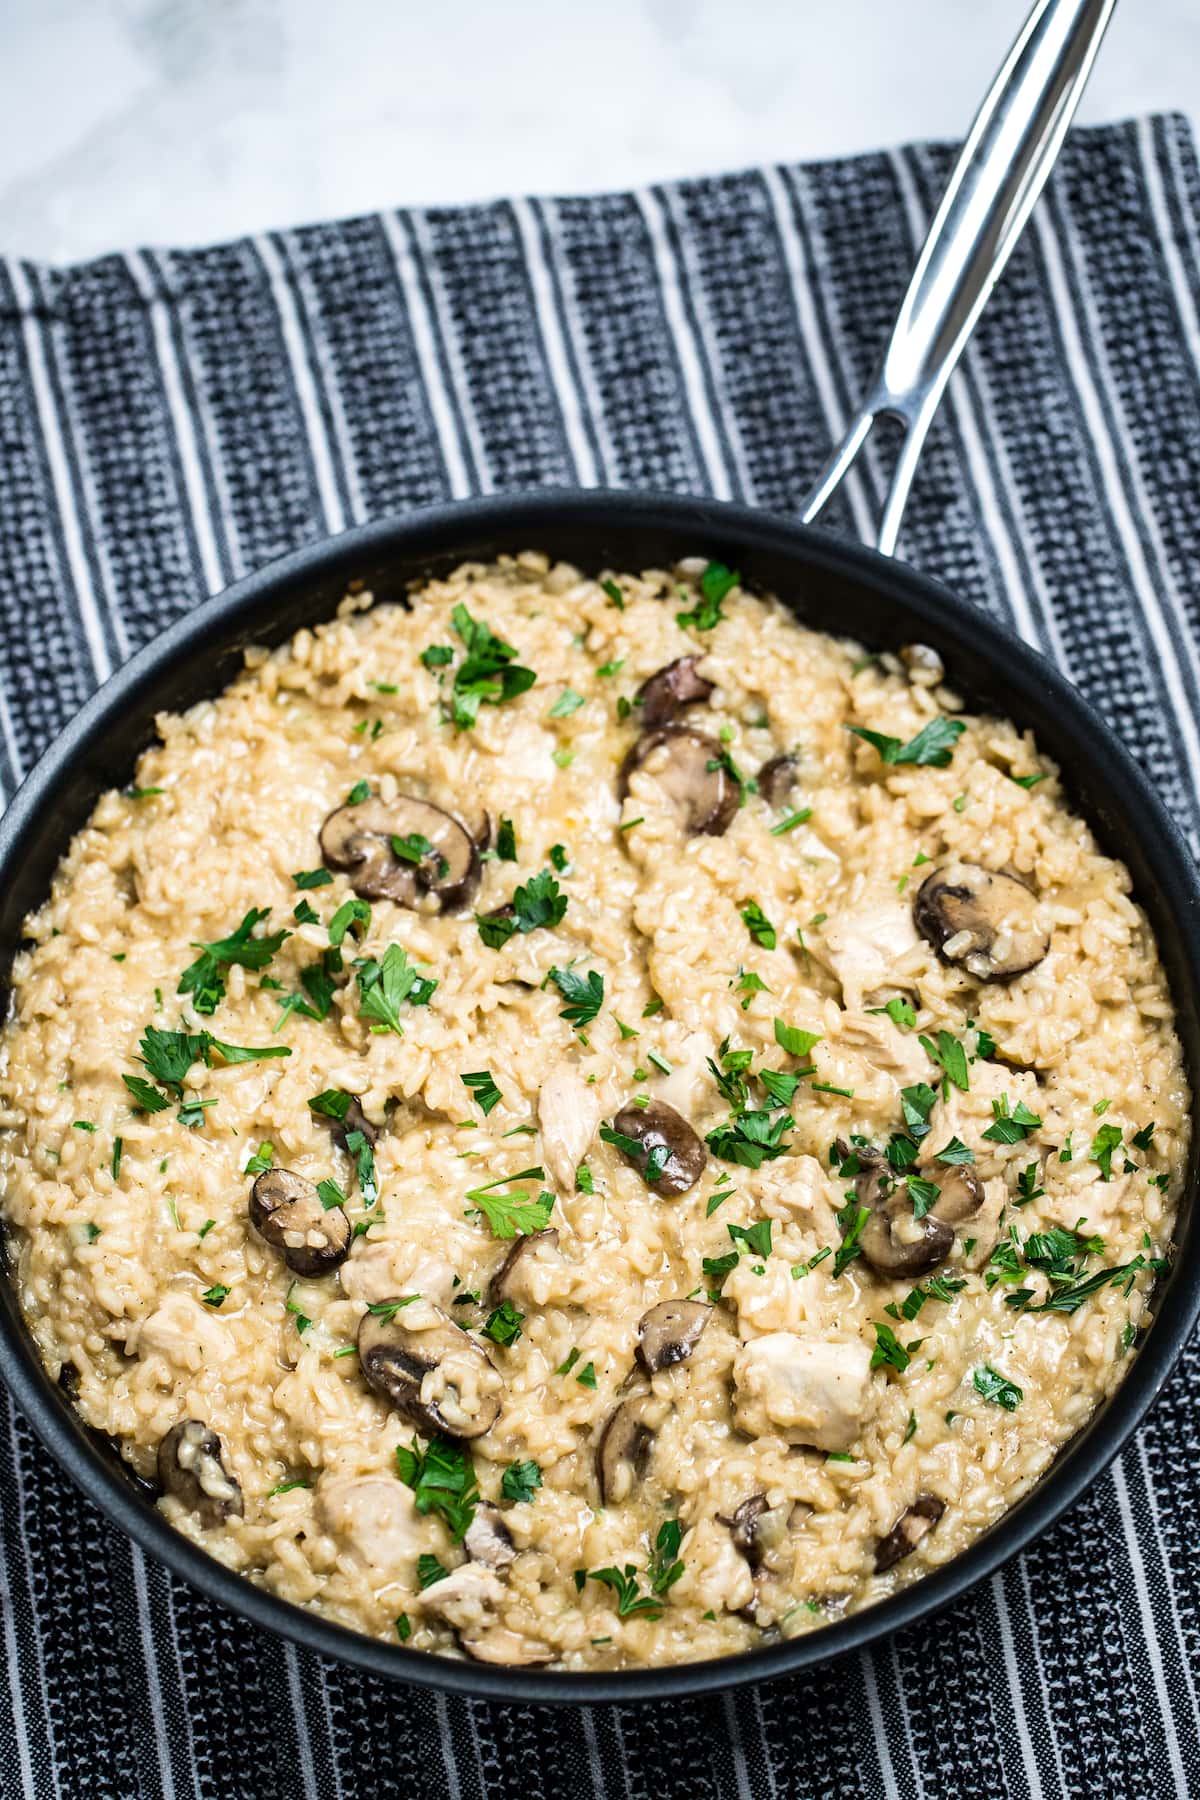 A skillet full of gluten free mushroom chicken risotto on a table.